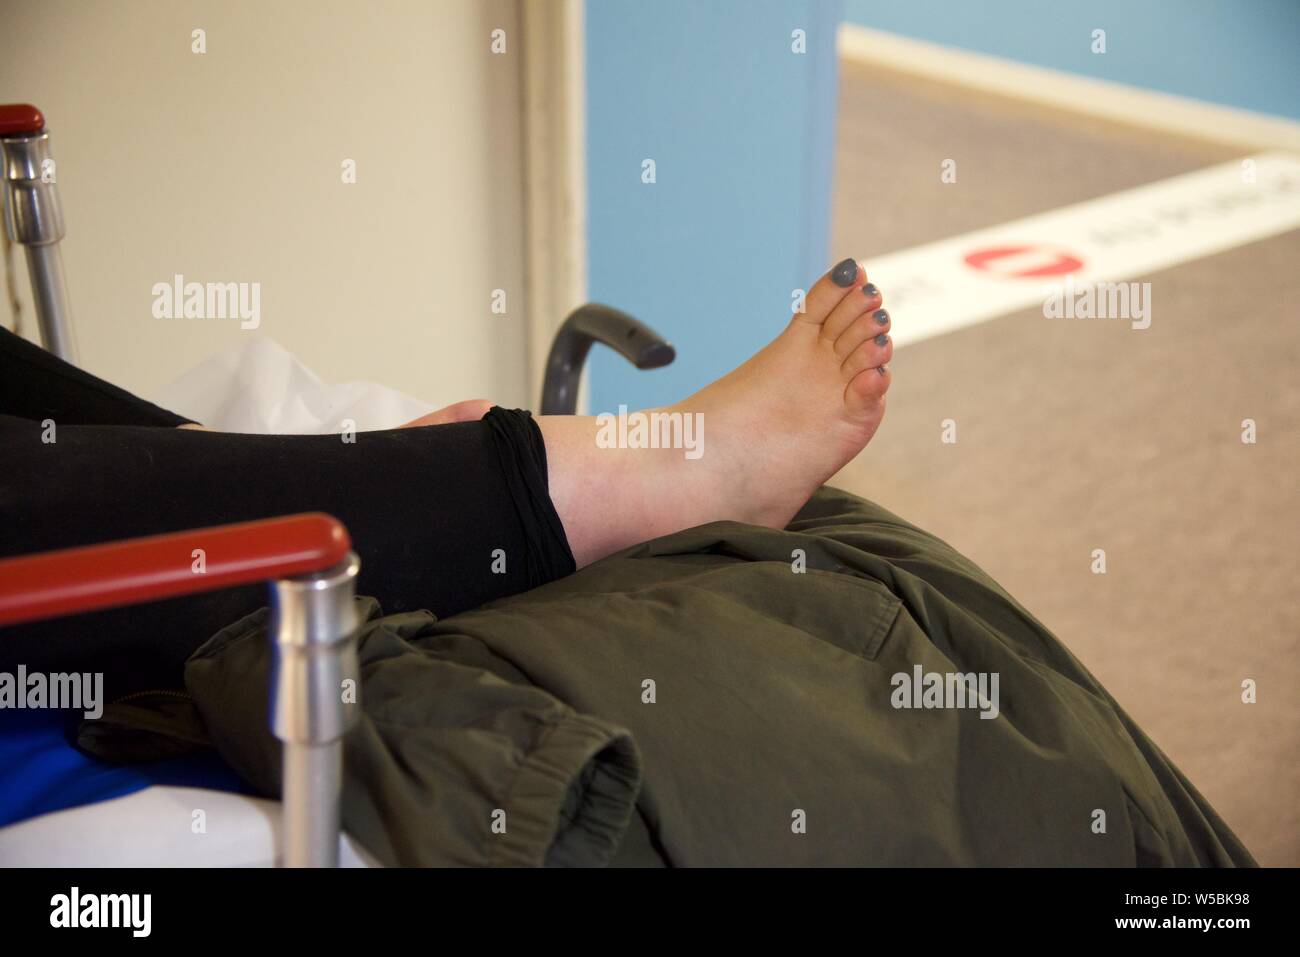 Broken ankle: a female patient with a broken right ankle waits on a gurney in the corridor of an hospital emergency department Stock Photo